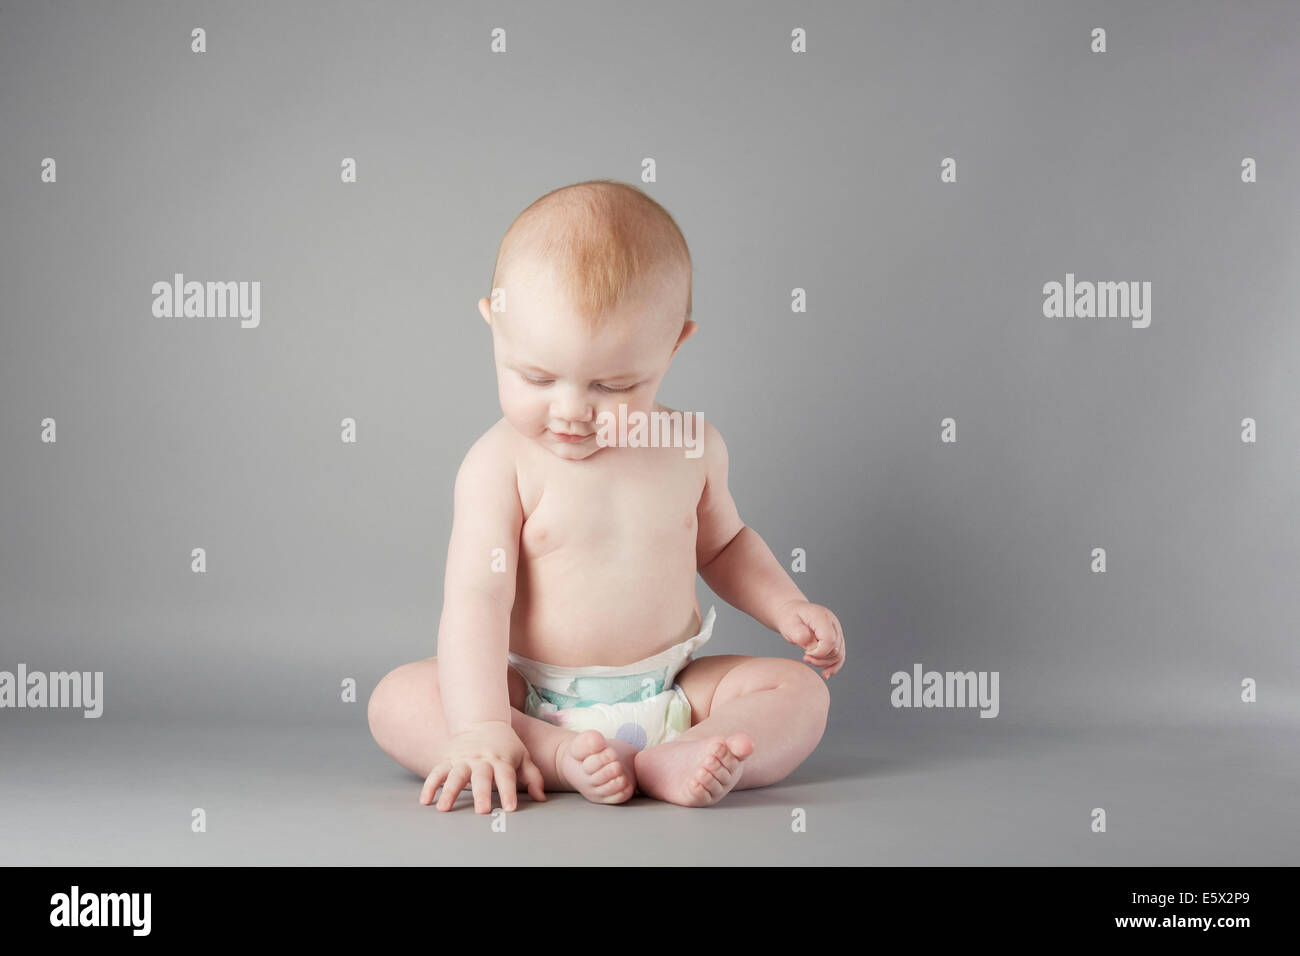 Studio portrait of baby boy sitting up and touching floor Stock Photo